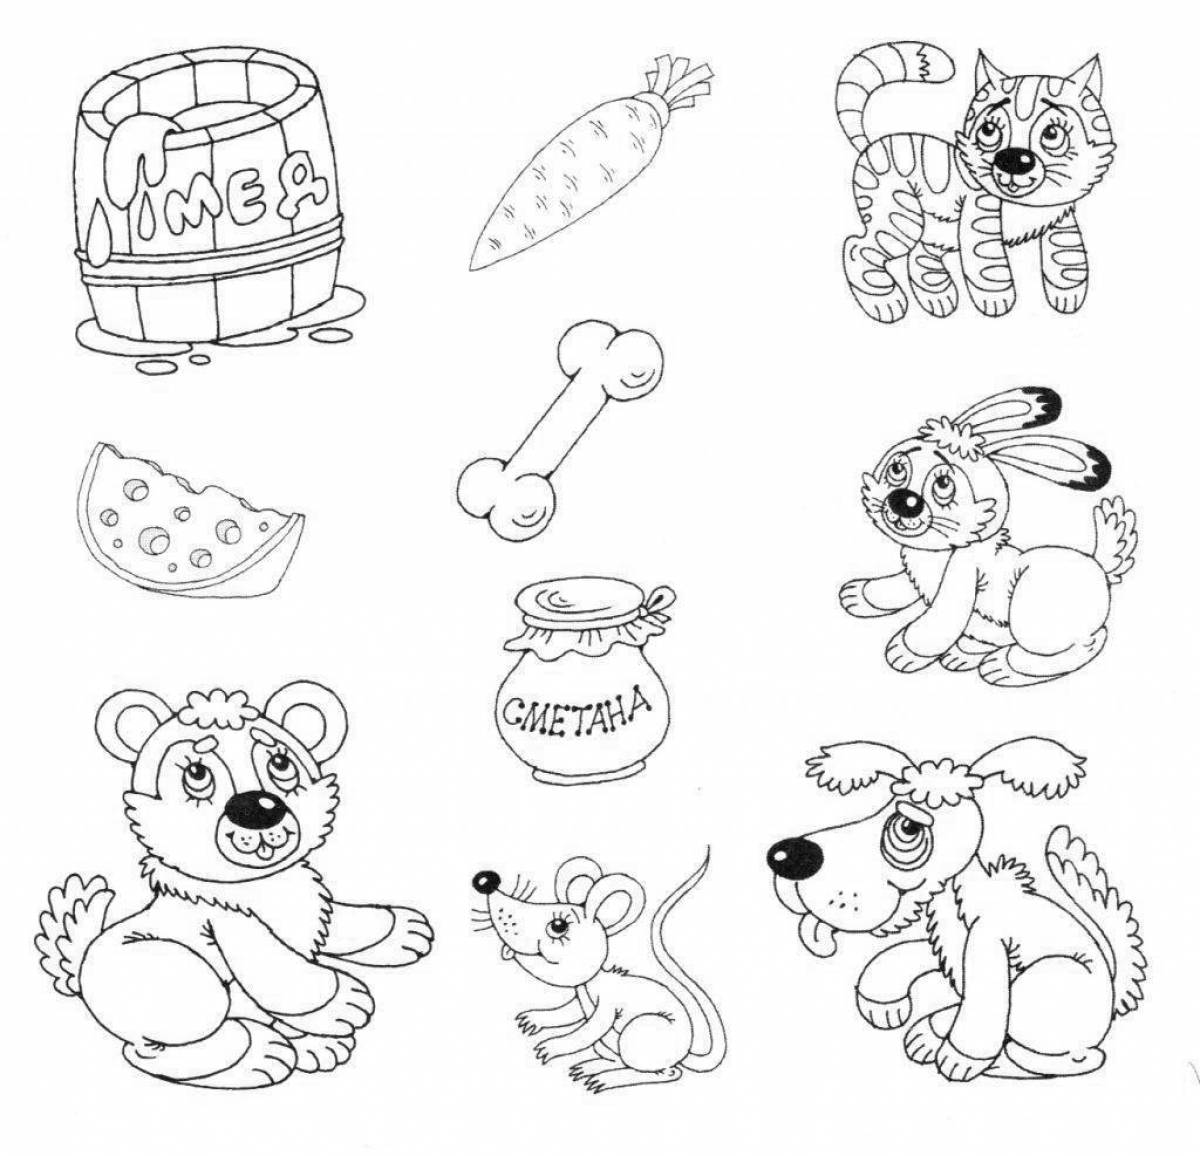 Adorable coloring book for 3 year olds